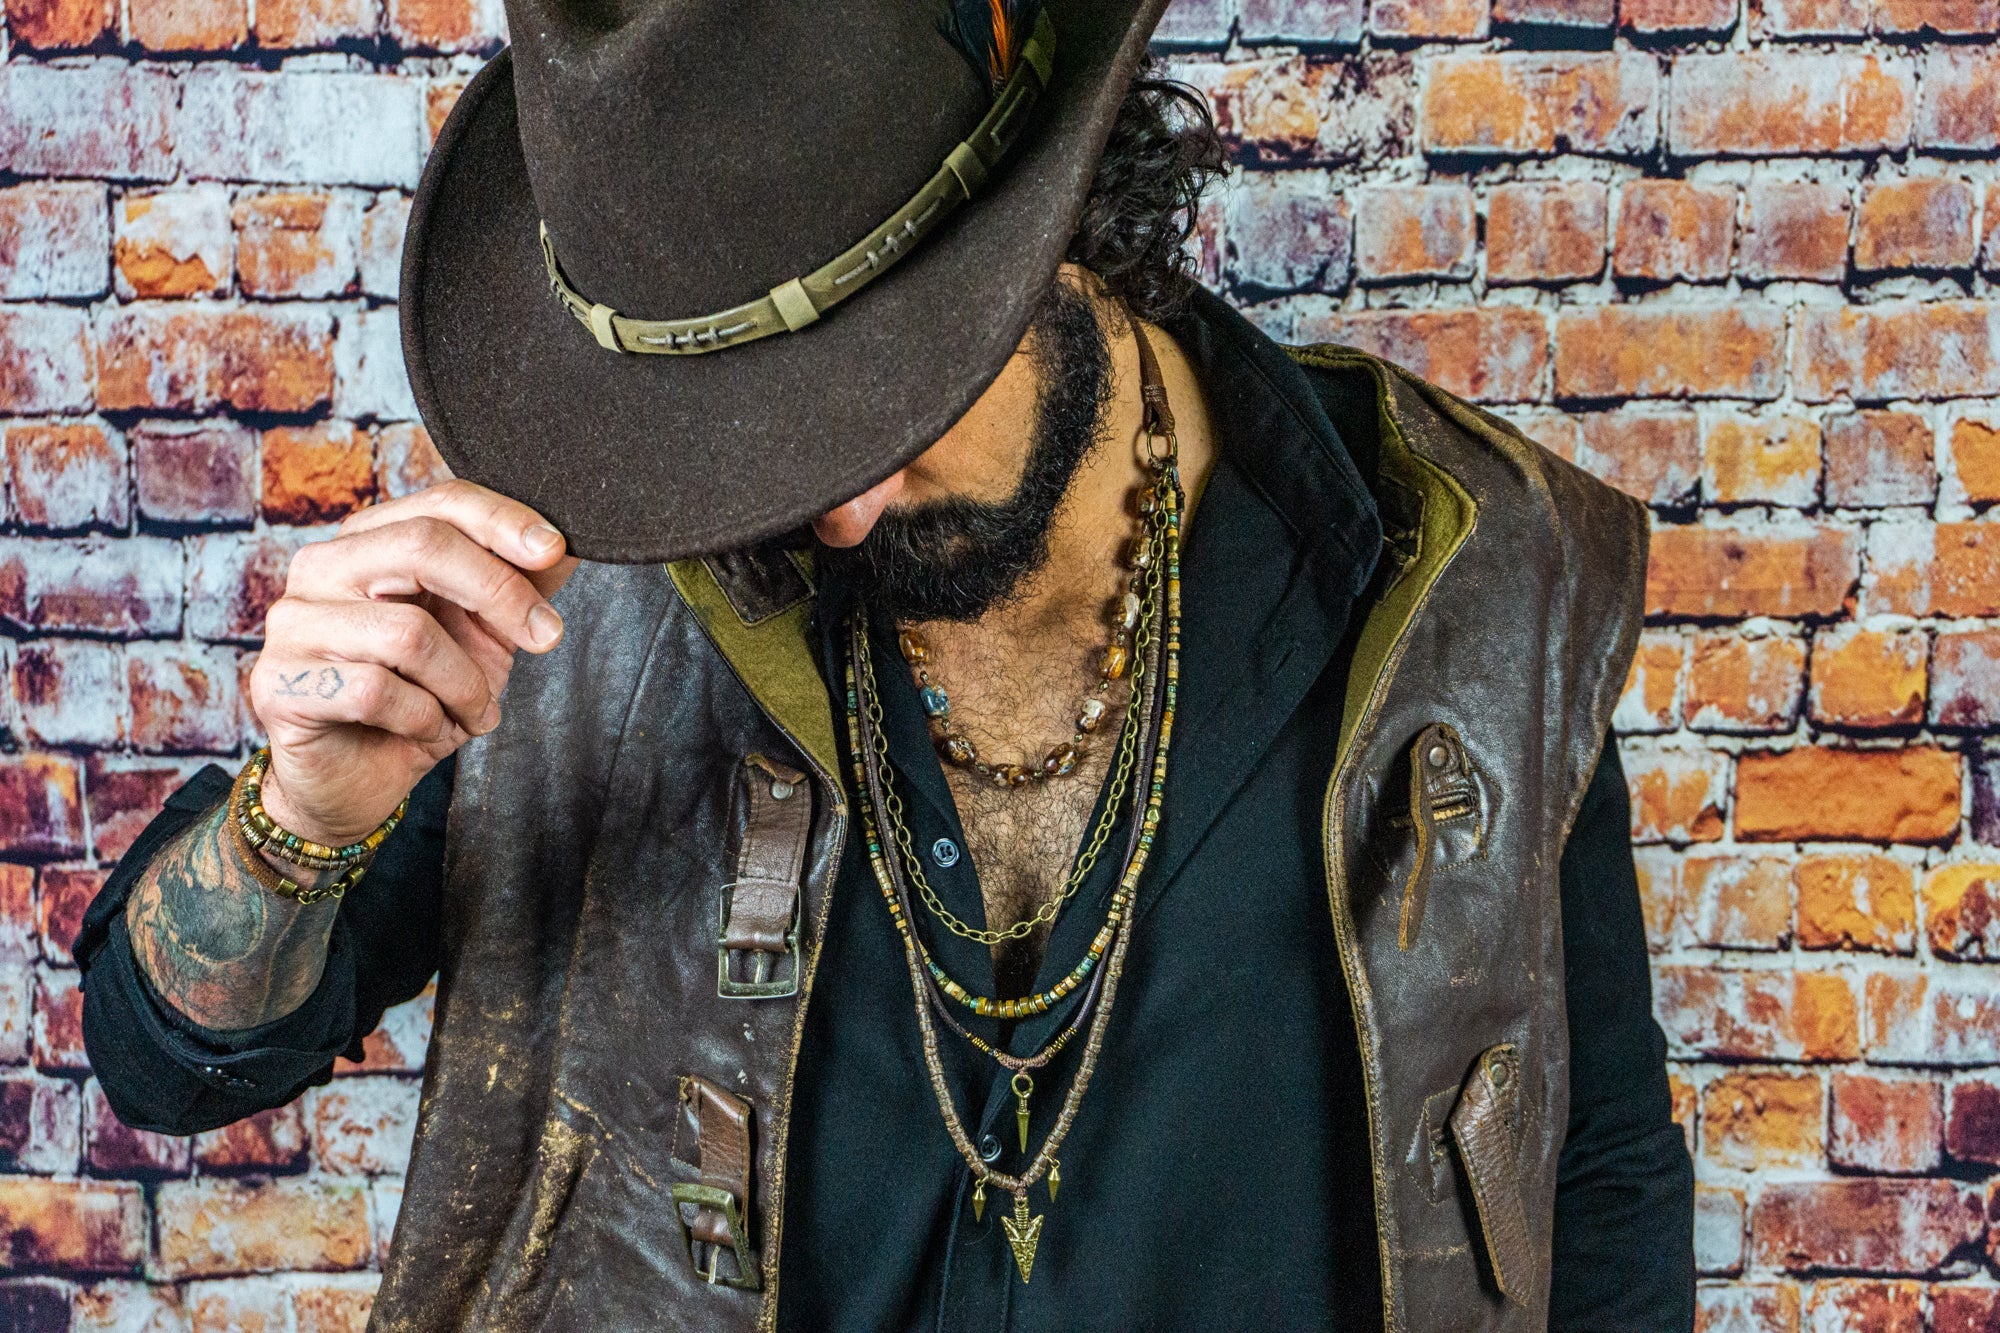 Express Your Inner Rebel with Our Handade Boho Men's Jewelry